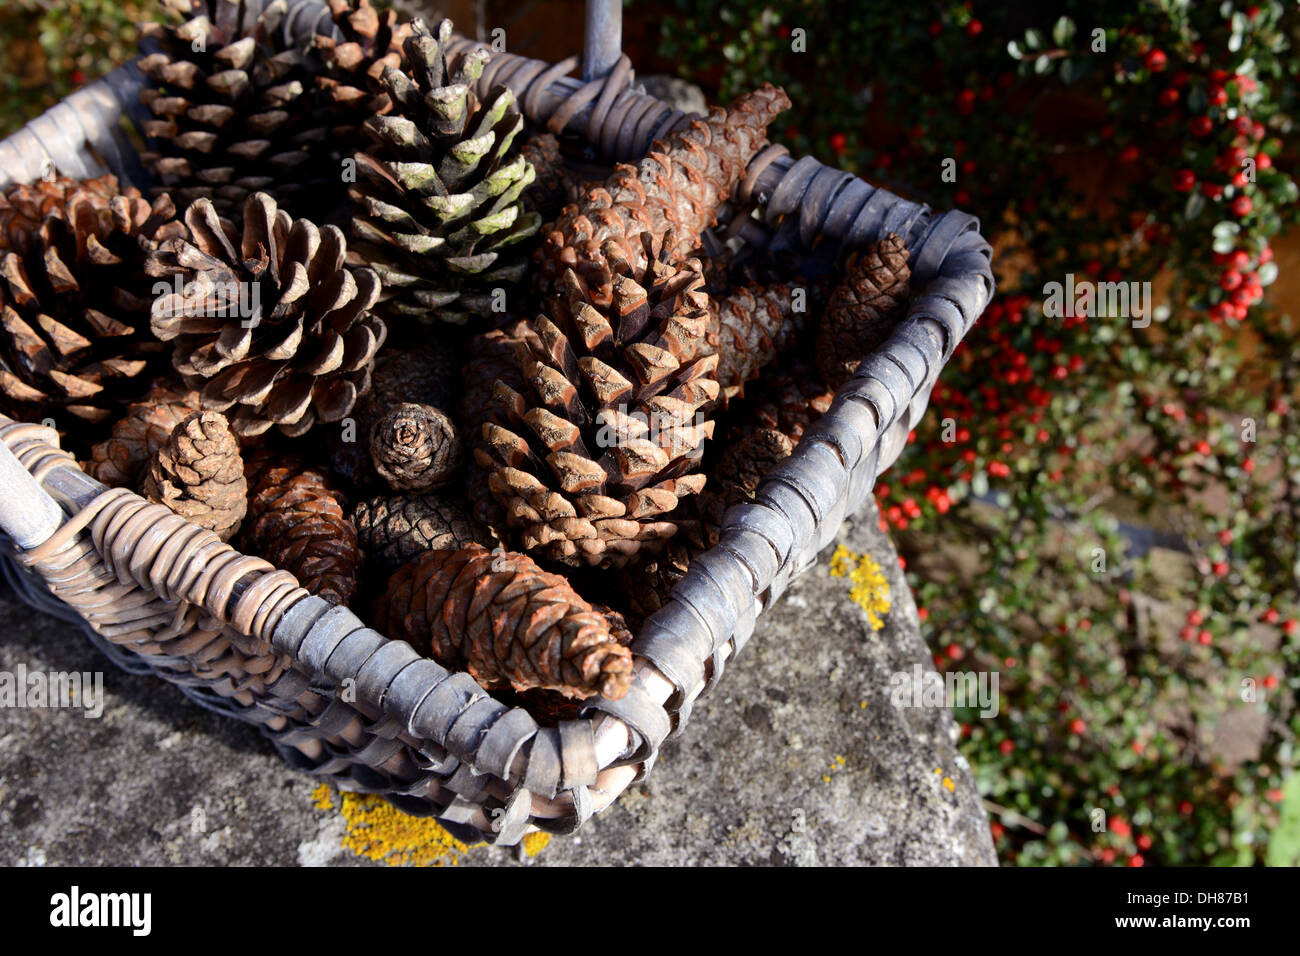 Closeup of basket of pine cones on a stone bench with red cotoneaster berries behind Stock Photo